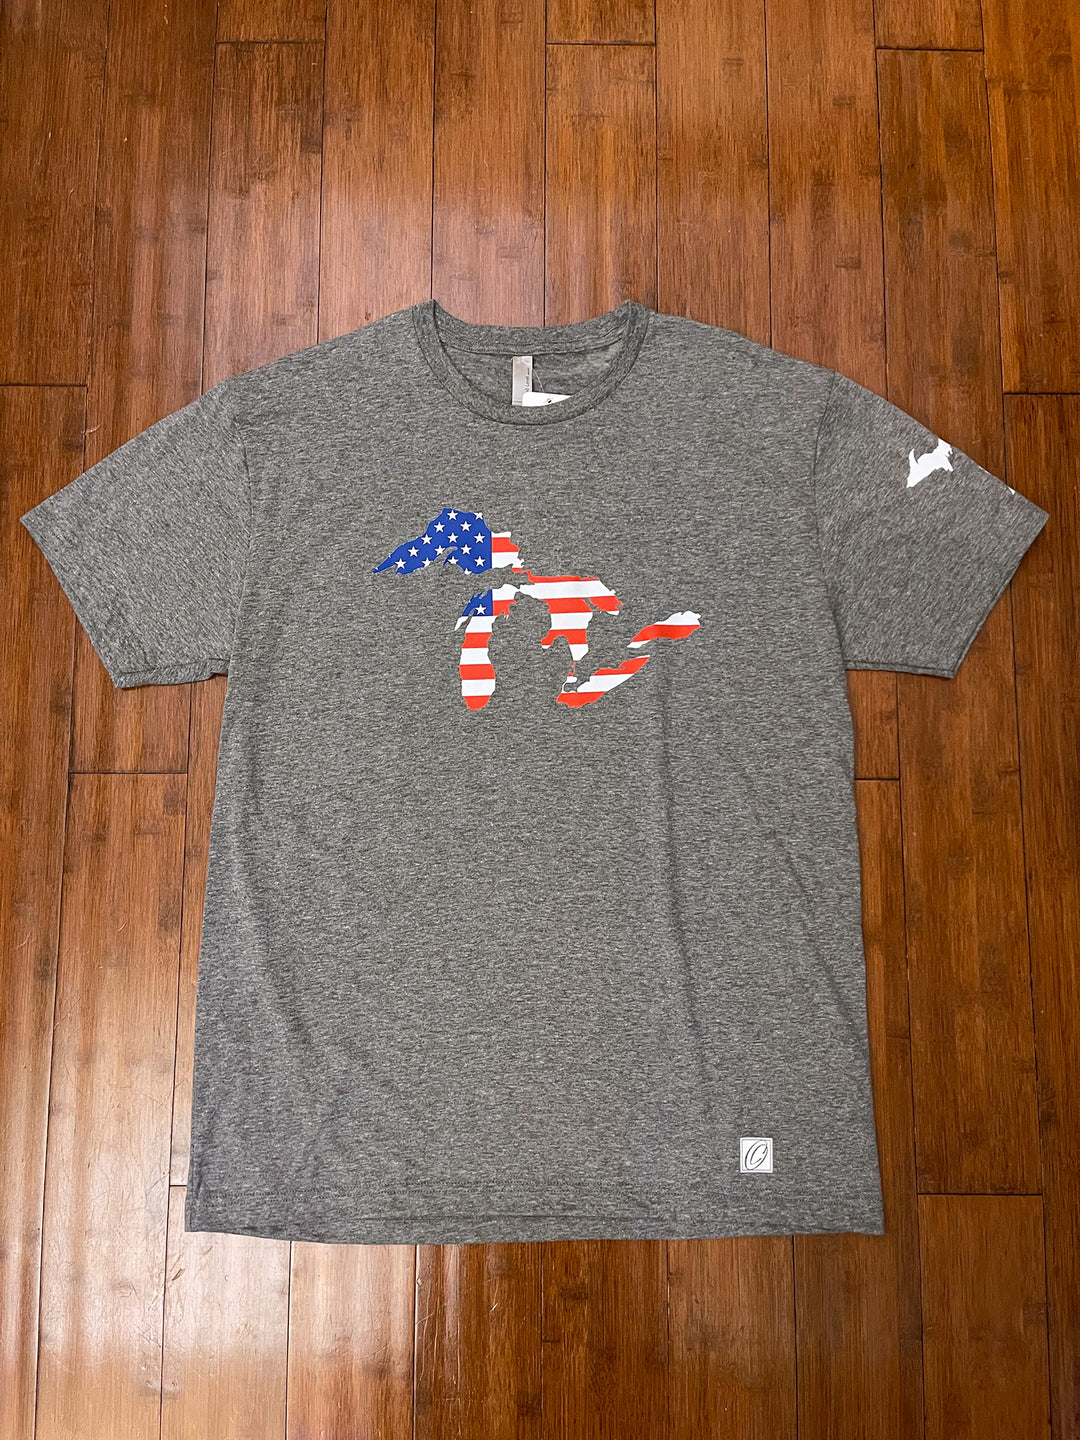 Adult L Next Level Triblend Crewneck Short Sleeve Tee - Great Lakes Silhouette - Stars & Stripes